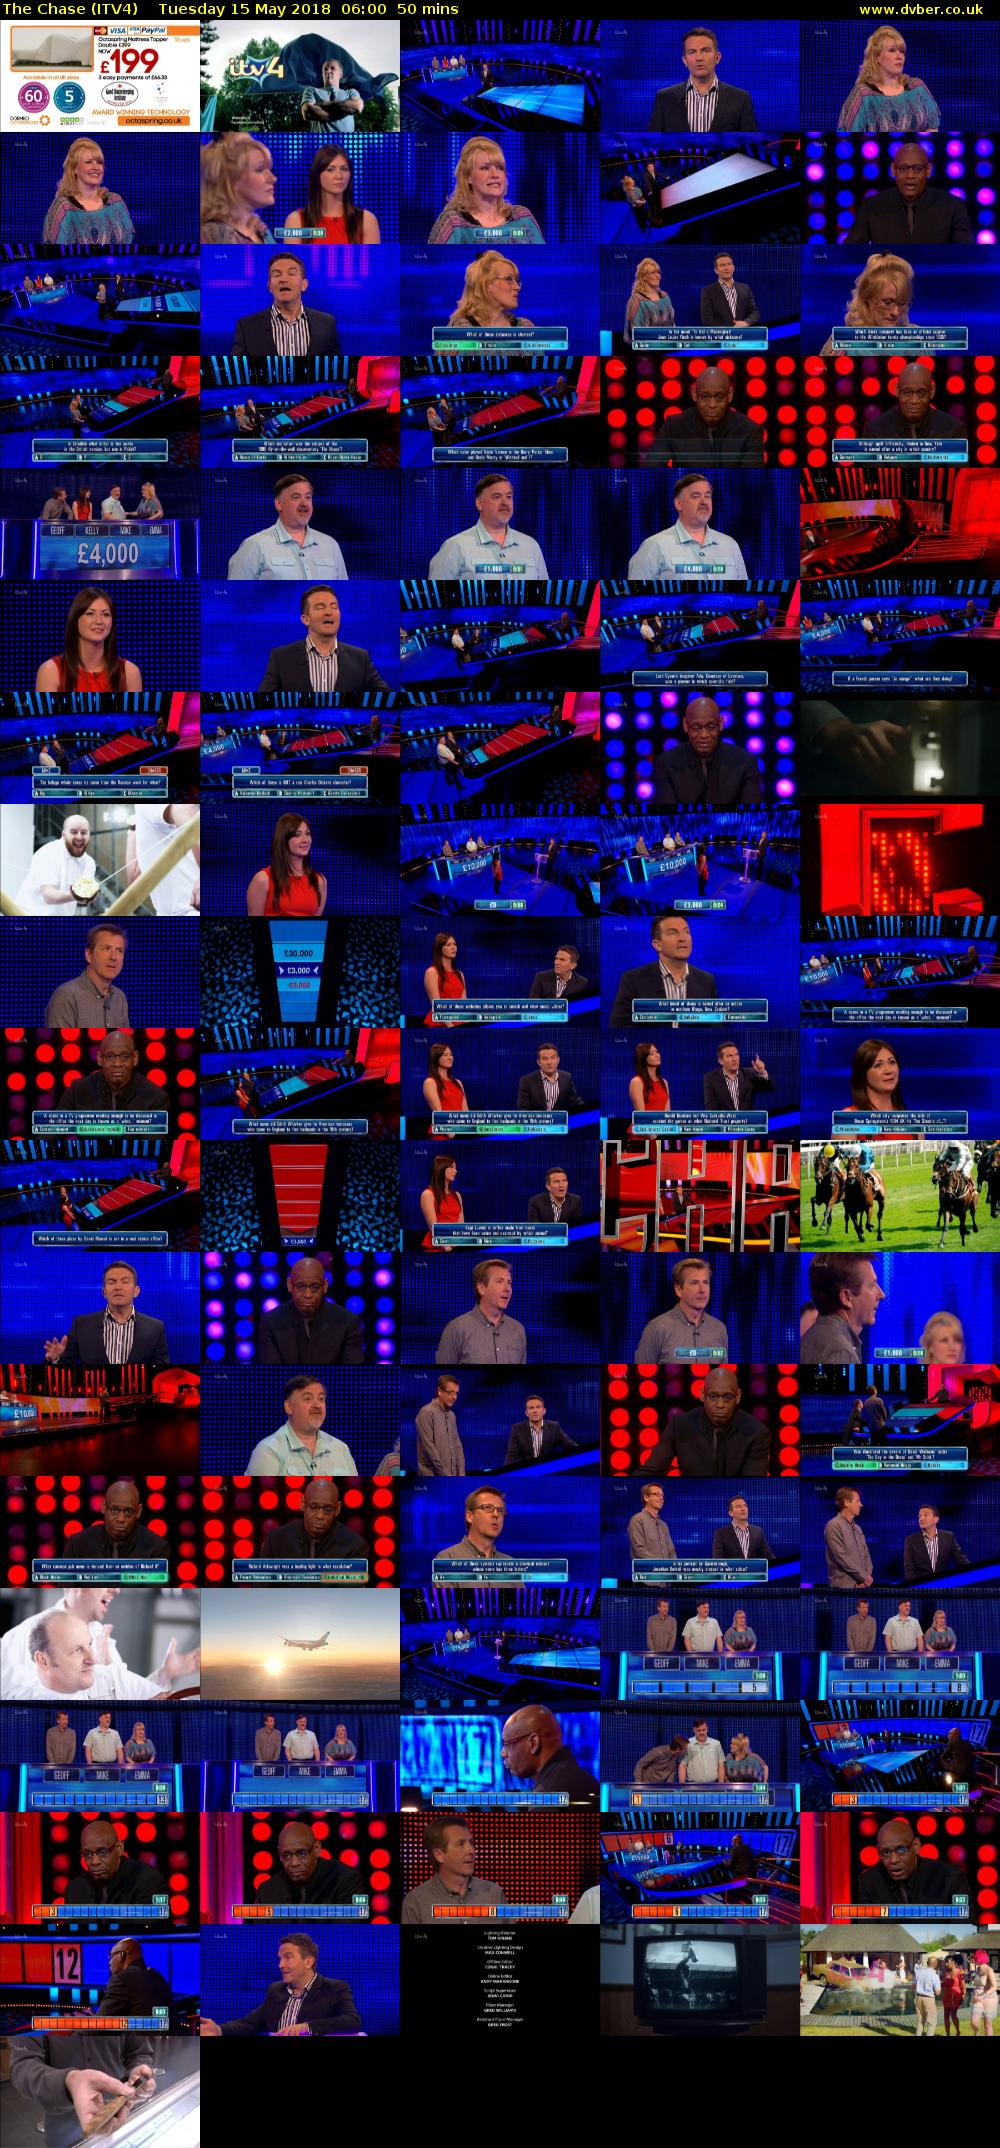 The Chase (ITV4) Tuesday 15 May 2018 06:00 - 06:50